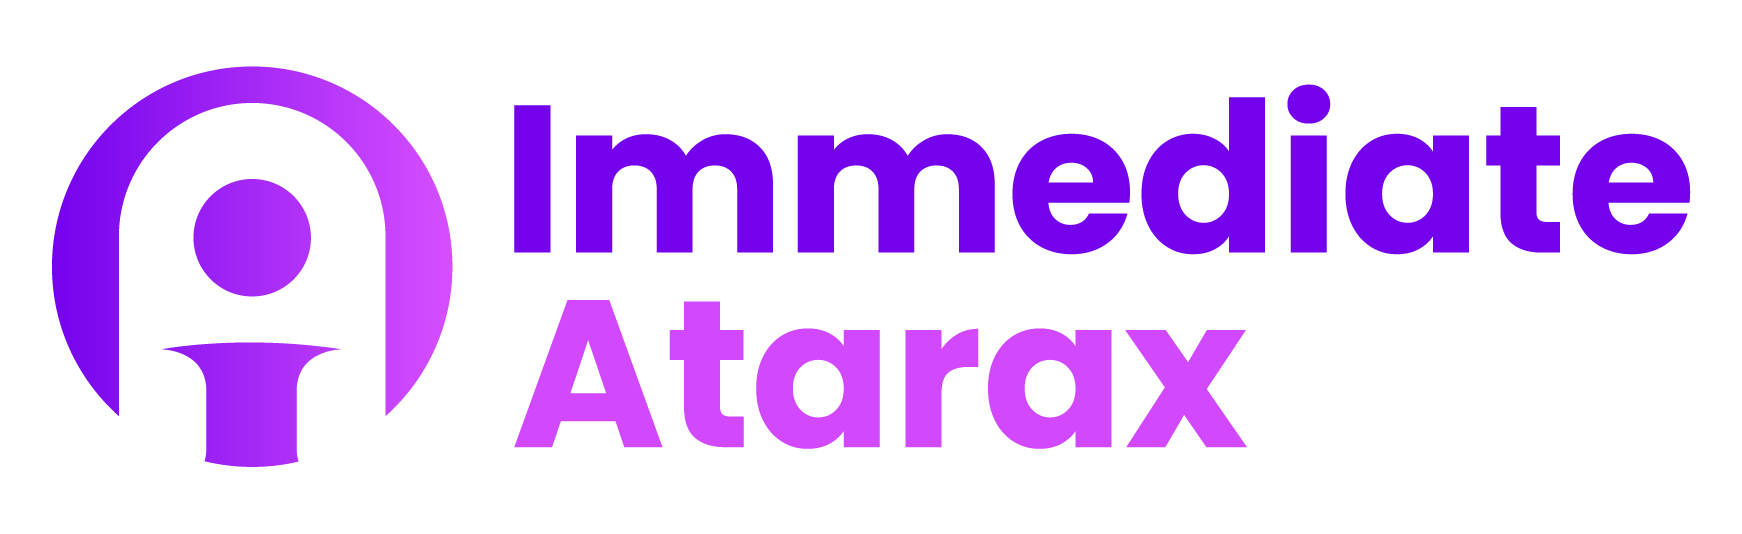 Immediate Atarax - BEGIN YOUR TRADING JOURNEY TODAY